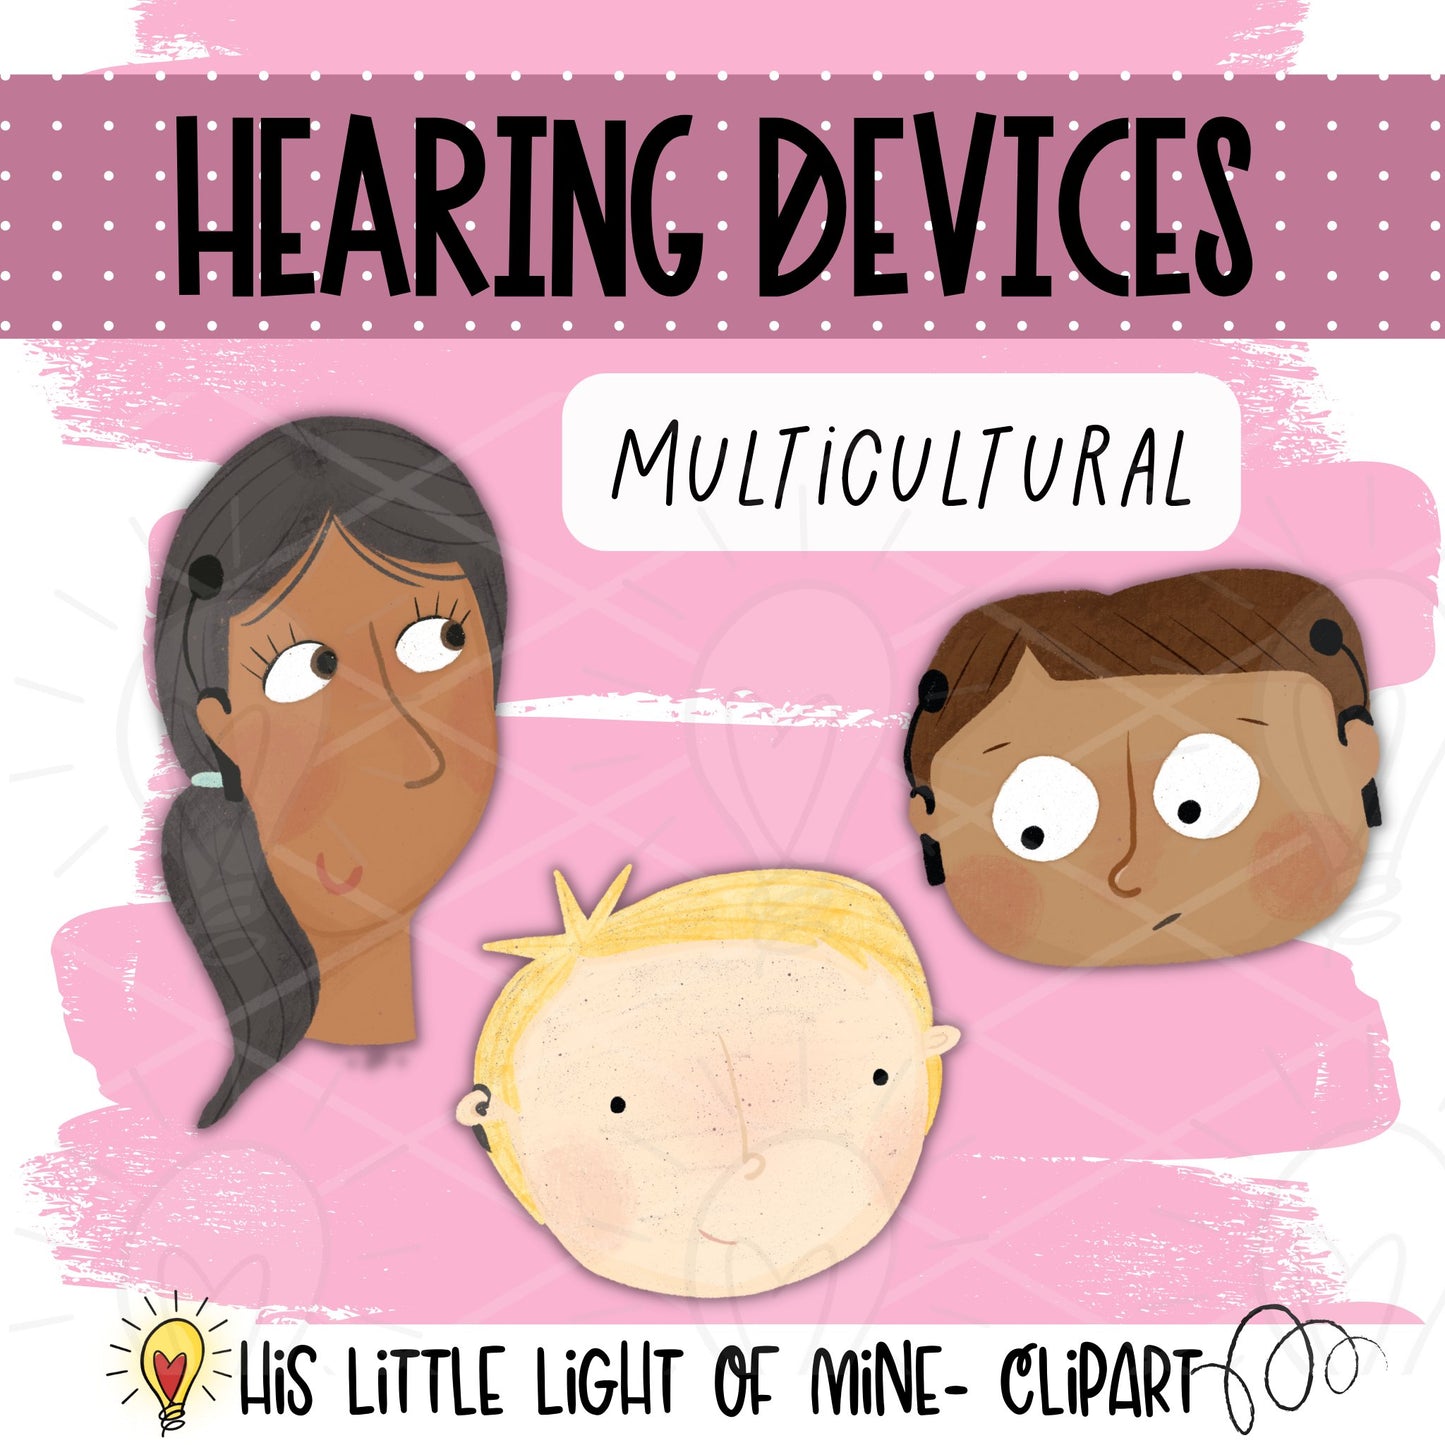 Includes Multicultural options of the Hearing Devices for children clip art pack featuring cochlear implants and hearing aids, single, bilateral and mixed devices.